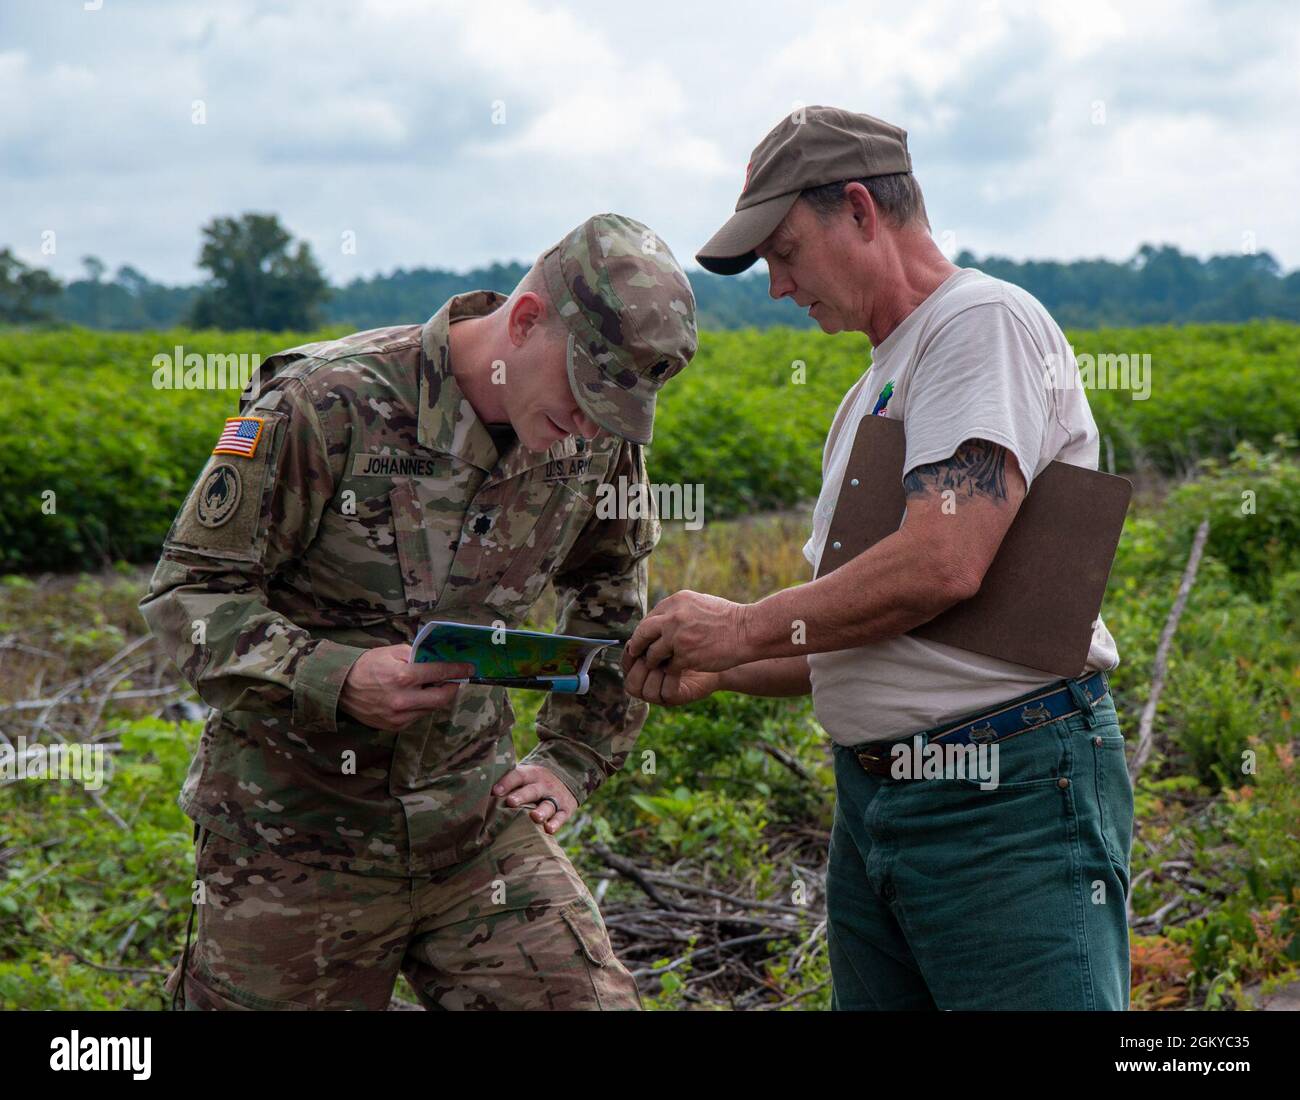 Richard Darden (right), the Regulatory Project Manager for the U.S. Army Corps Of Engineers, Charleston District, explains to Lt. Col. Andrew Johannes how to analyze soil samples during a field visit in Orangeburg, S.C.  Johannes took command of the district in July and was taking part in delineation training, designed to better educate new members of the district to what regulators do for their job. Stock Photo